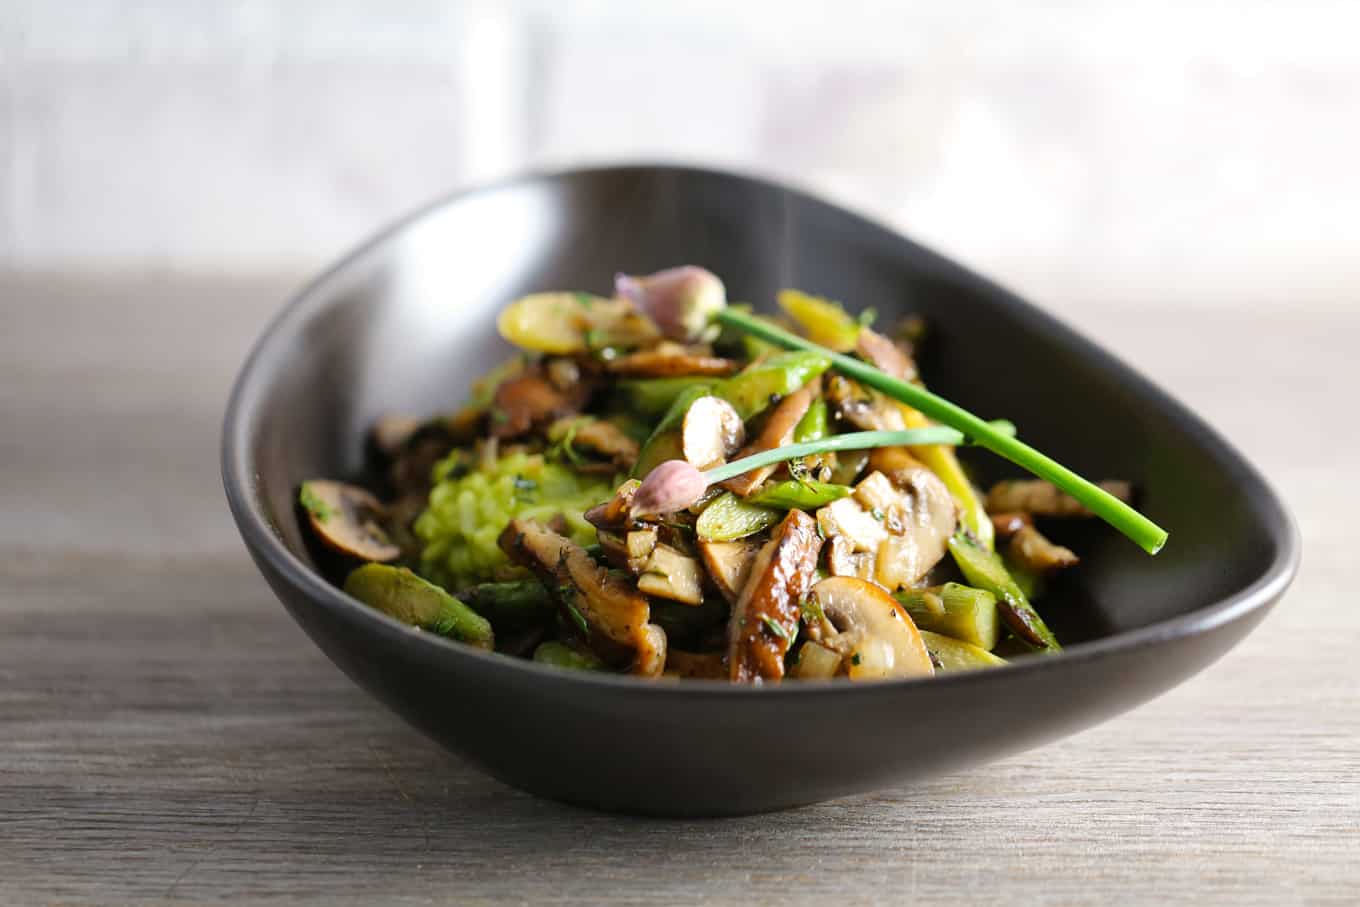 A bowl of asparagus risotto with mushrooms.